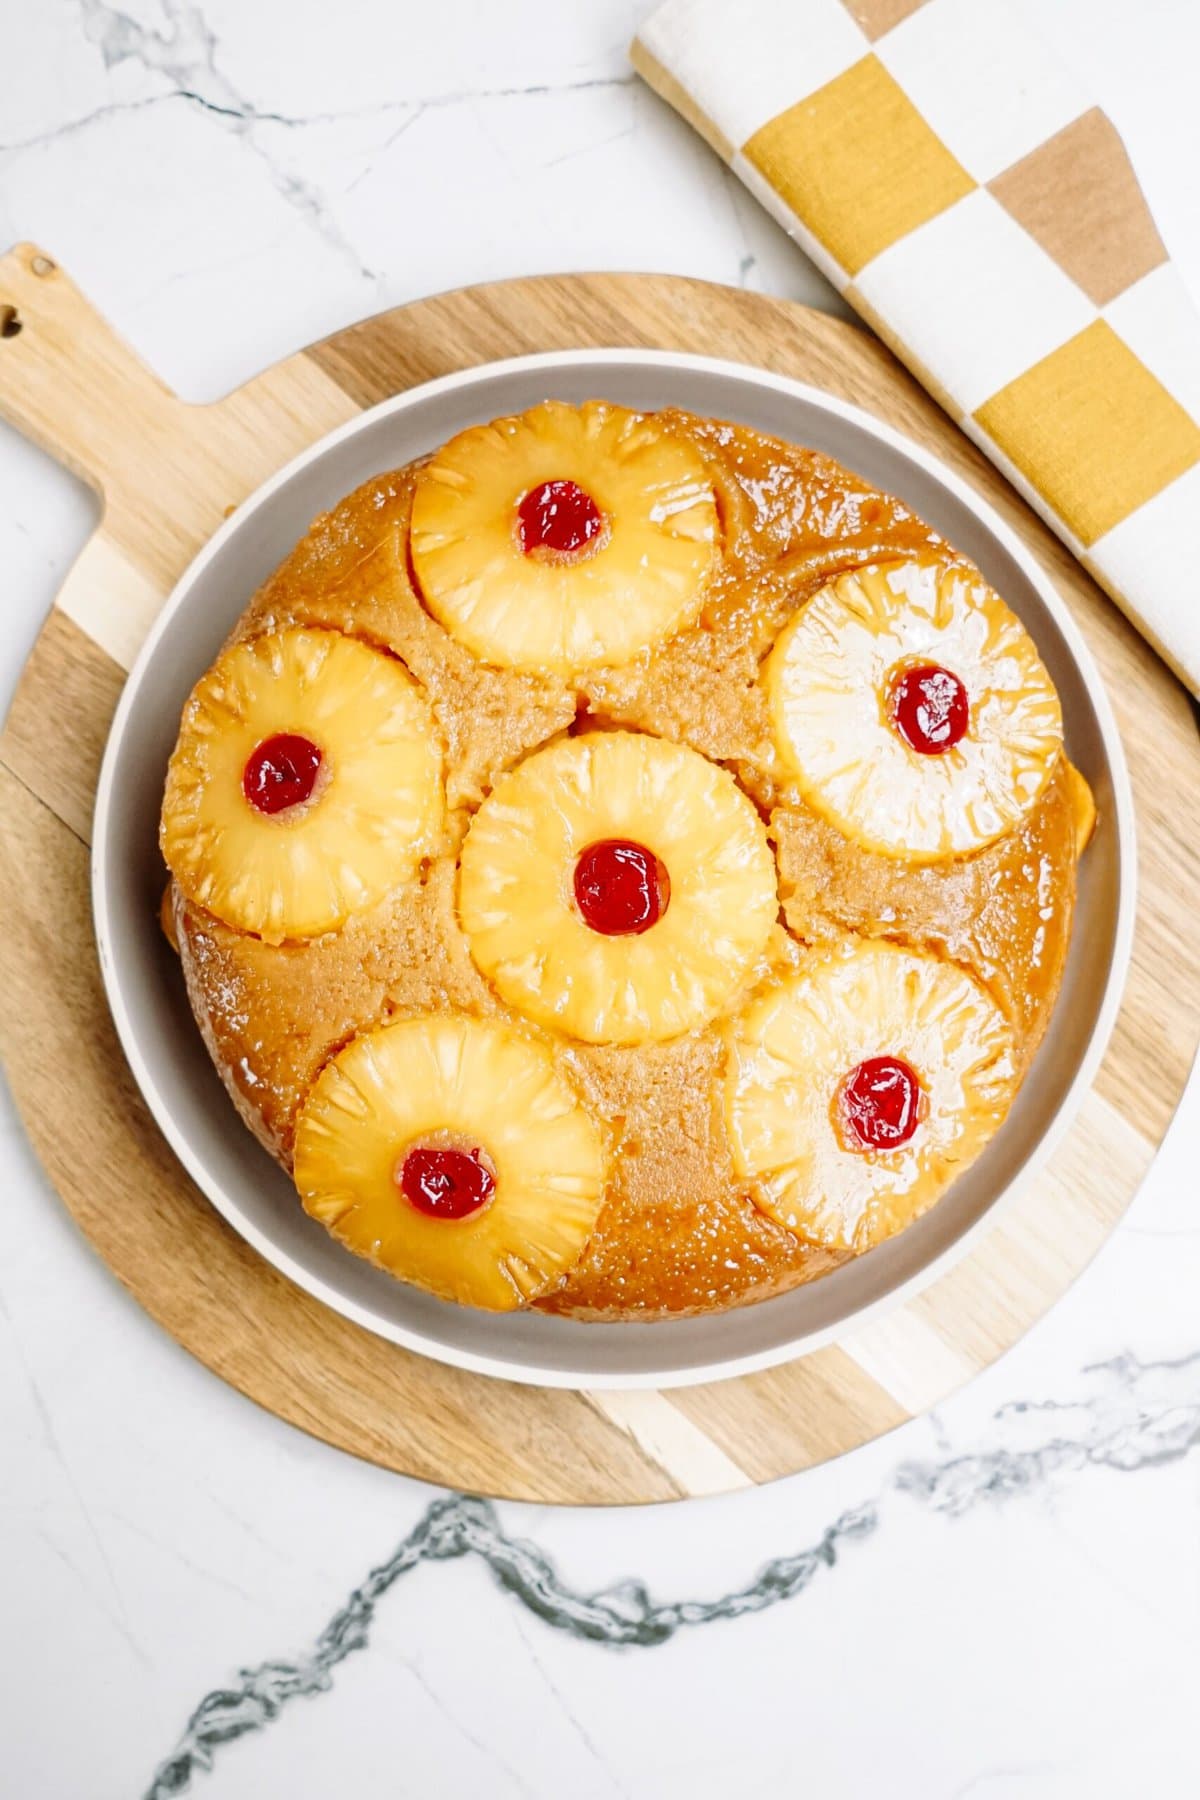 A pineapple upside-down cake with cherry garnishes, displayed on a table.